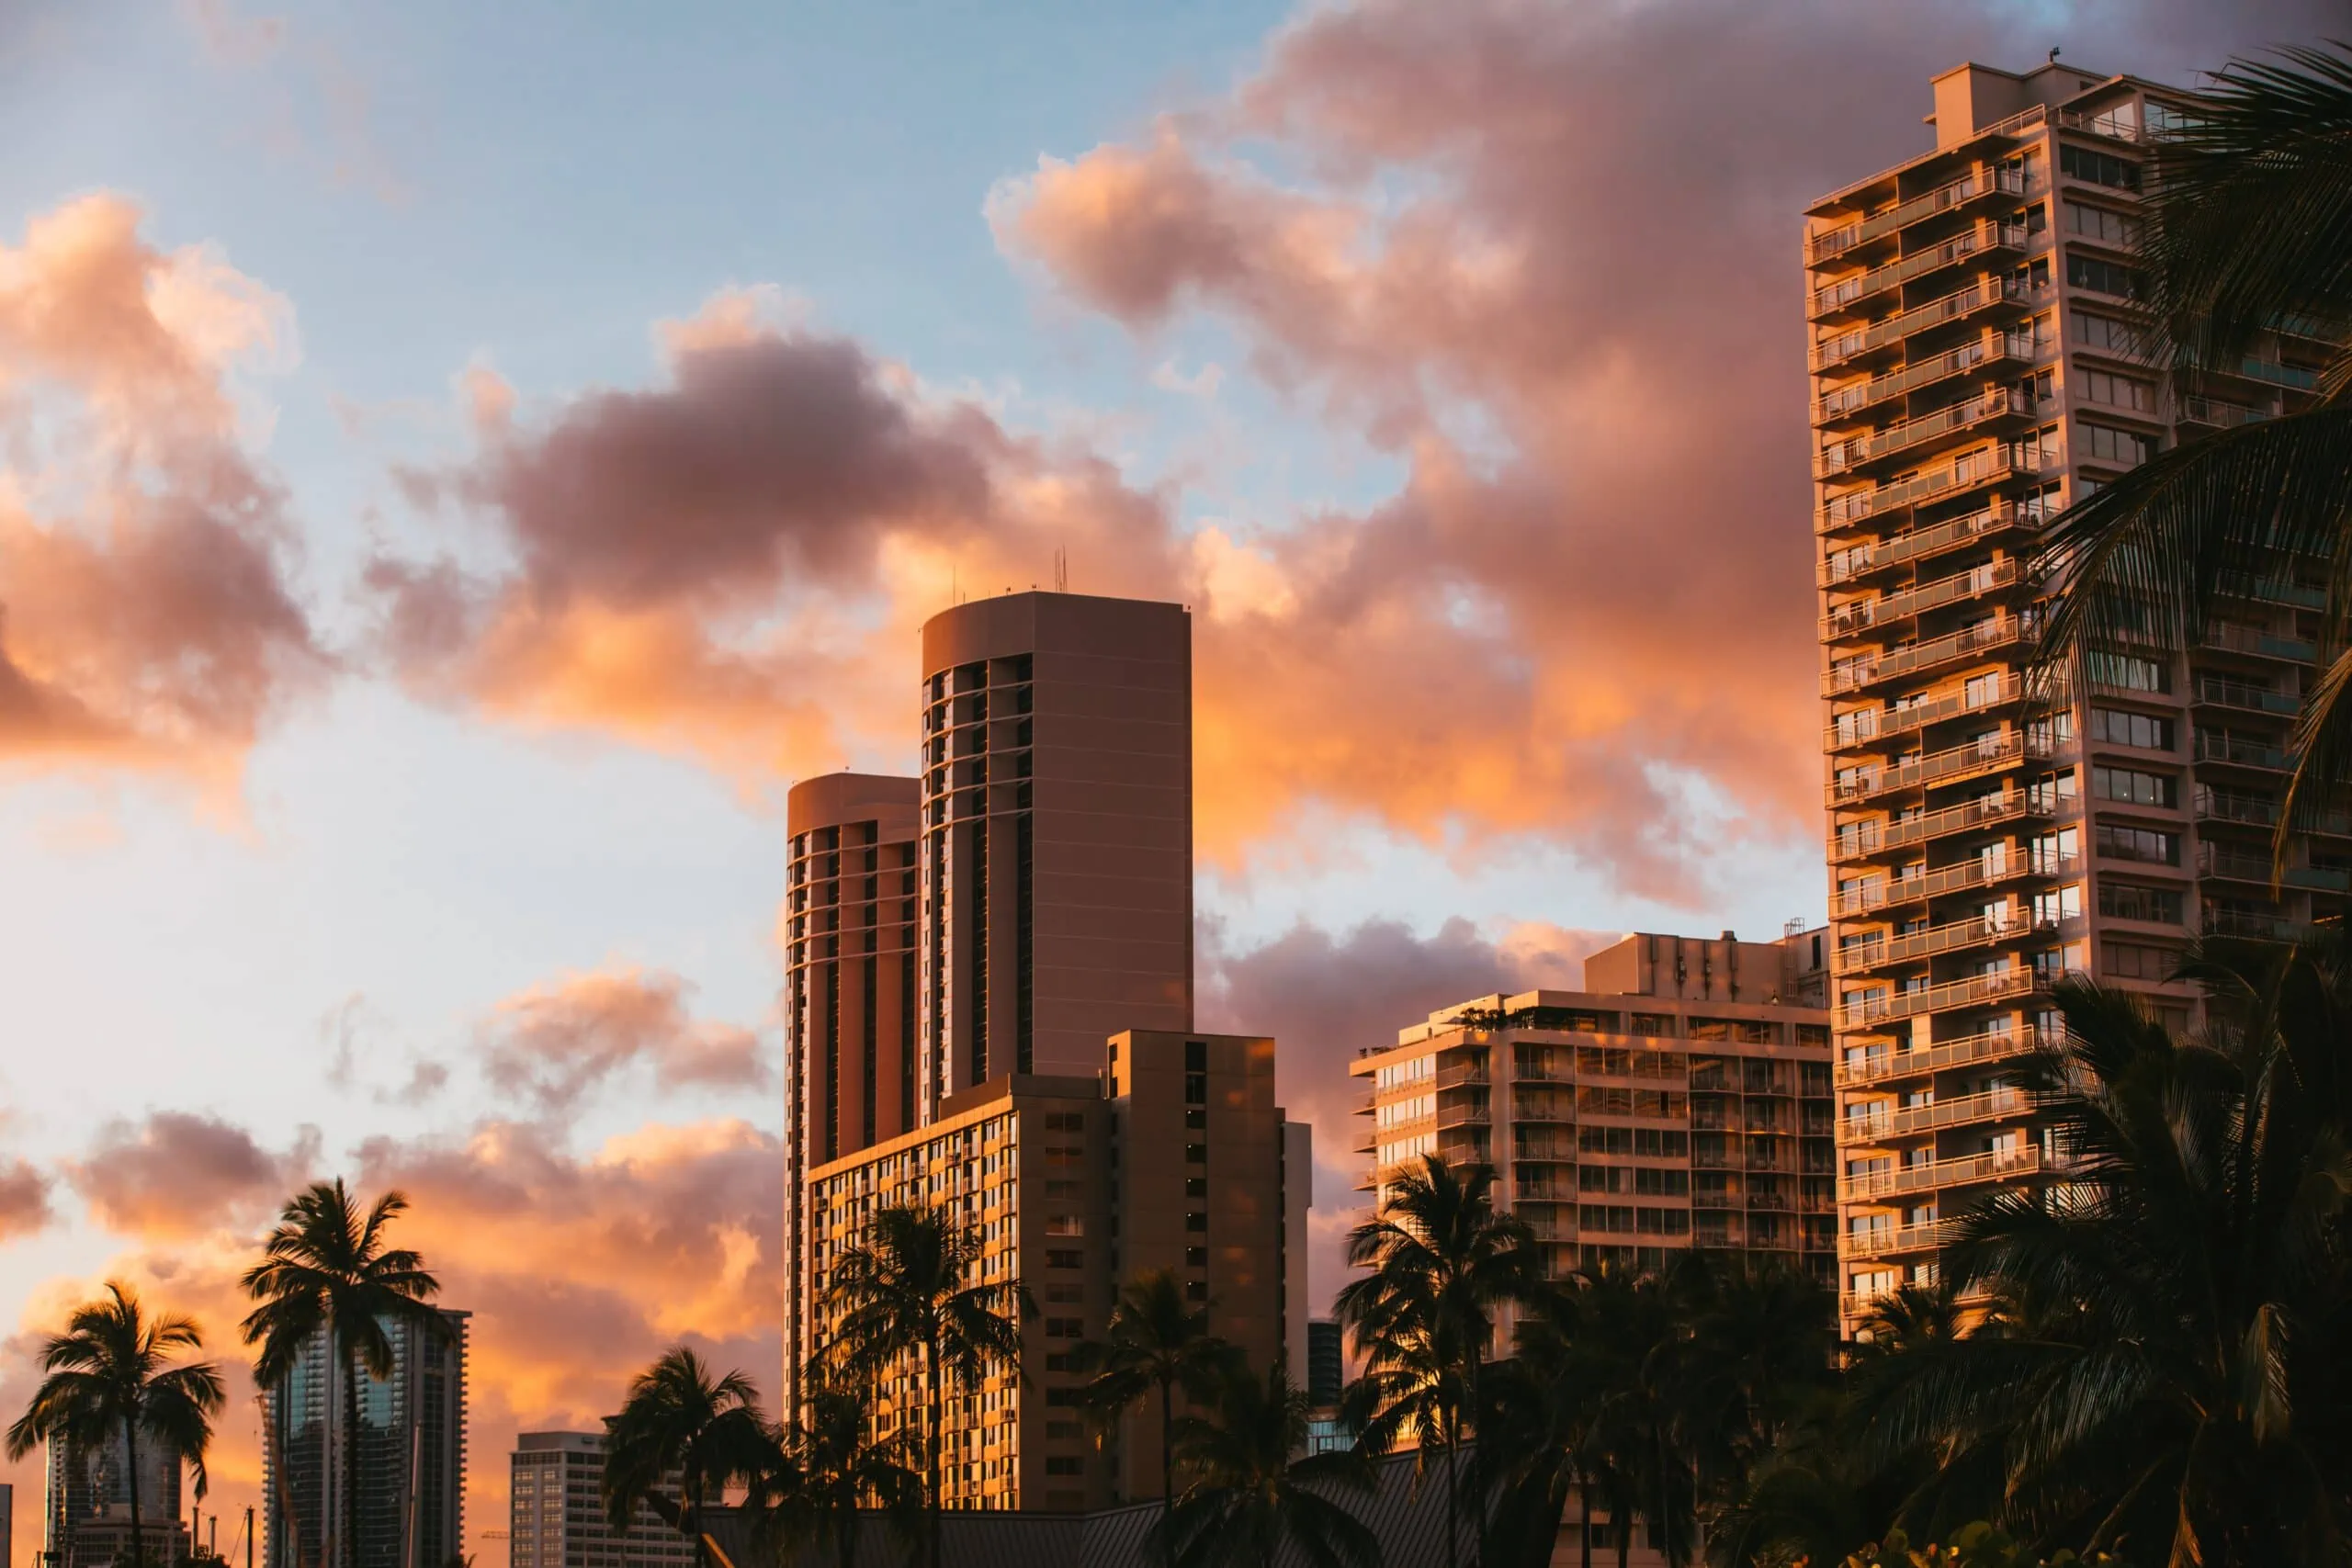 Apartment buildings in Hawaii safe with security cameras